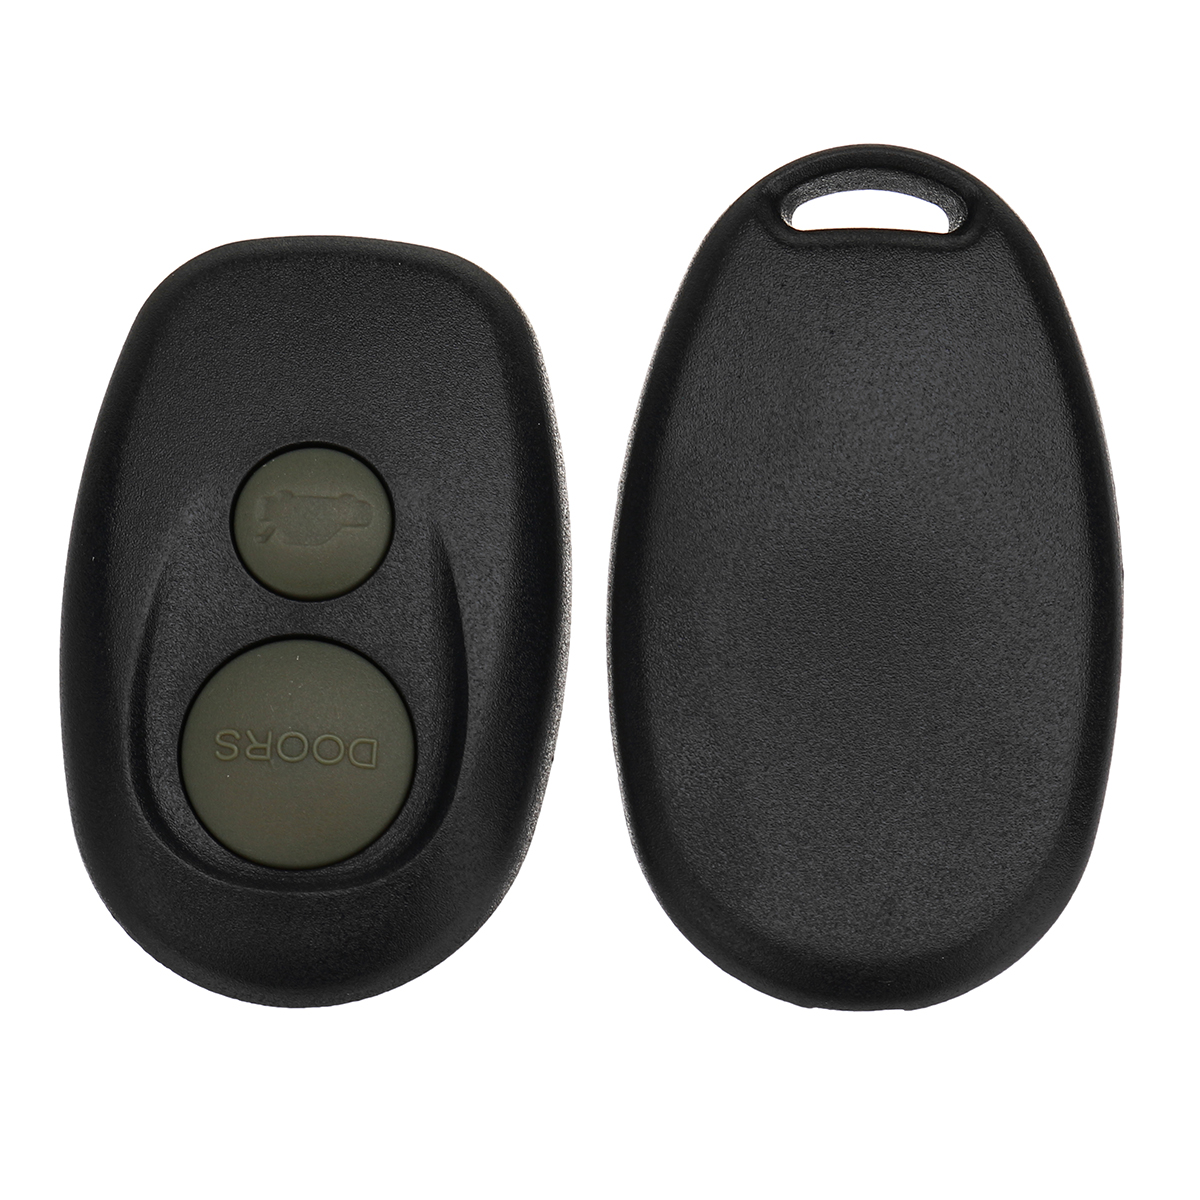 2 Button Car Remote Key Fob Case Shell Replacement for Toyota Camry Avalon 00-06